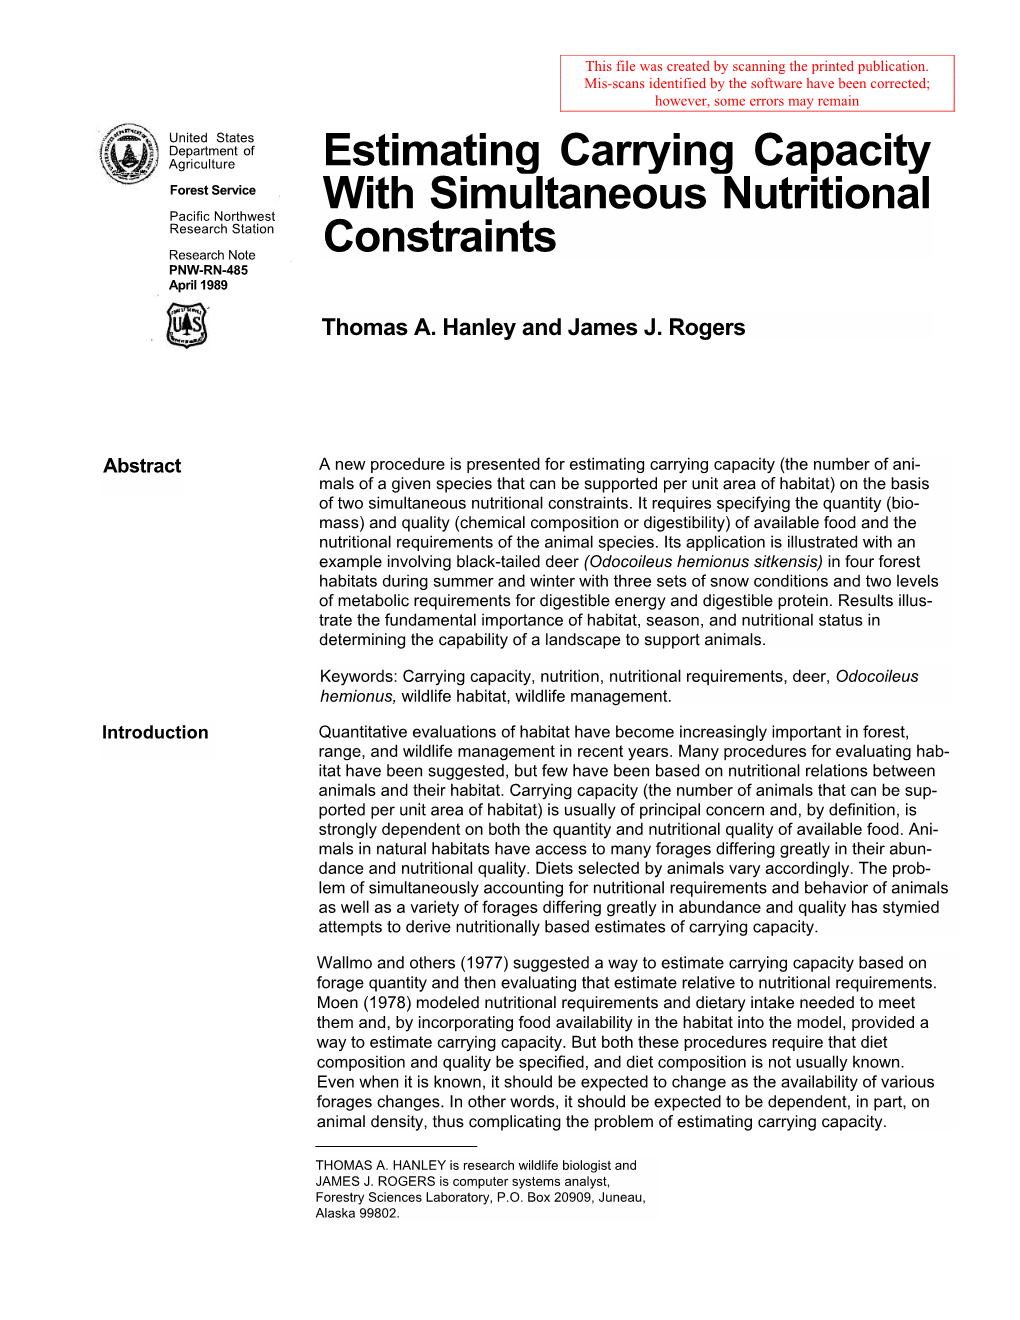 Estimating Carrying Capacity with Simultaneous Nutritional Constraints